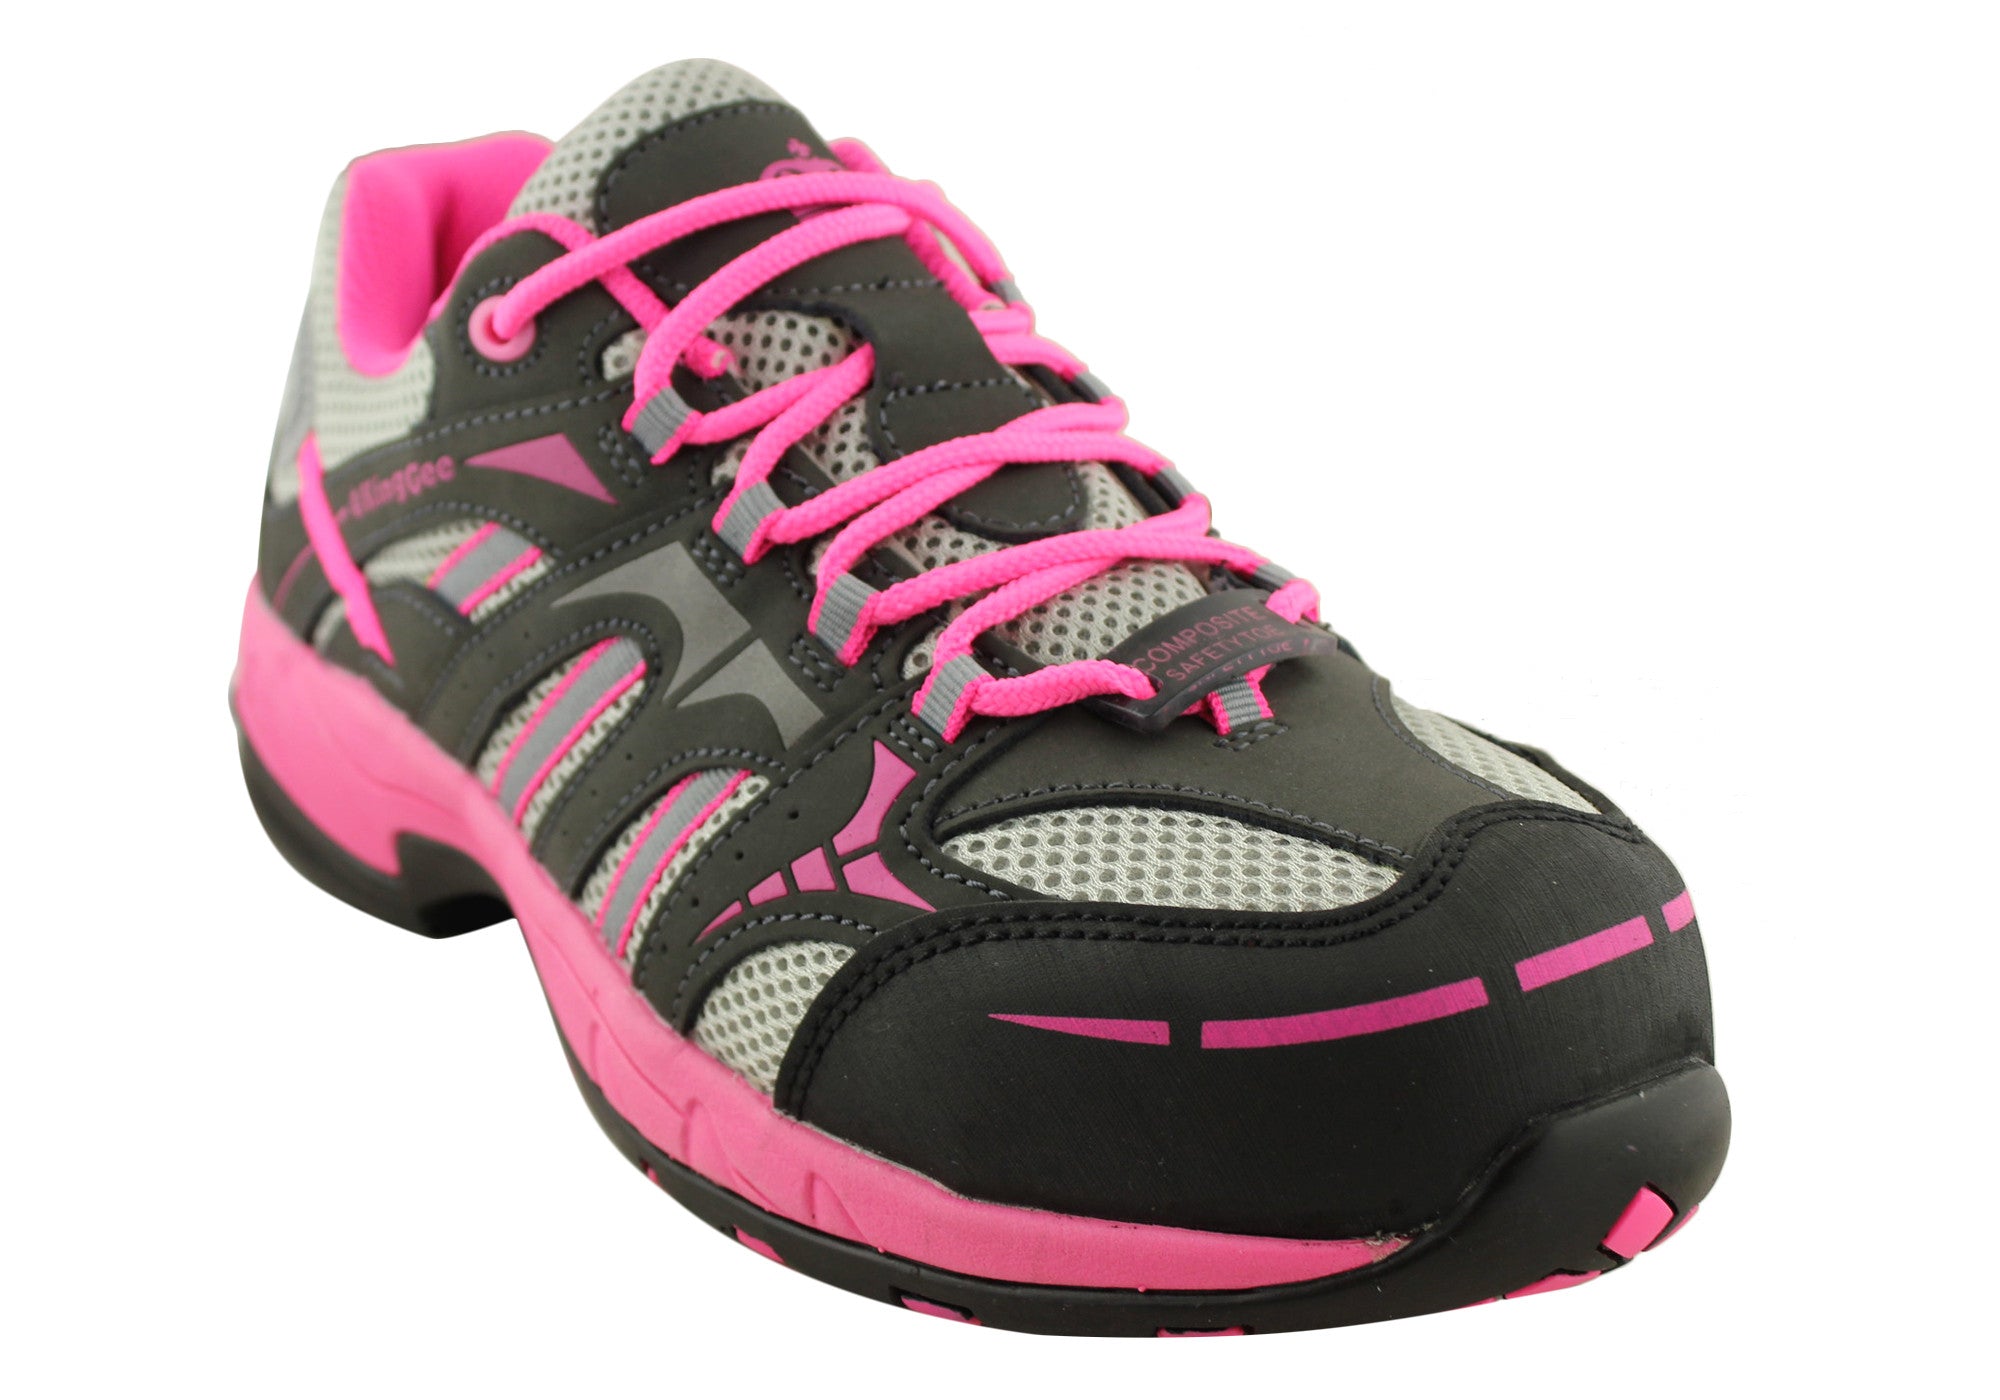 King Gee Womens Comp-Tec G3 Composite Toe Safety Shoes